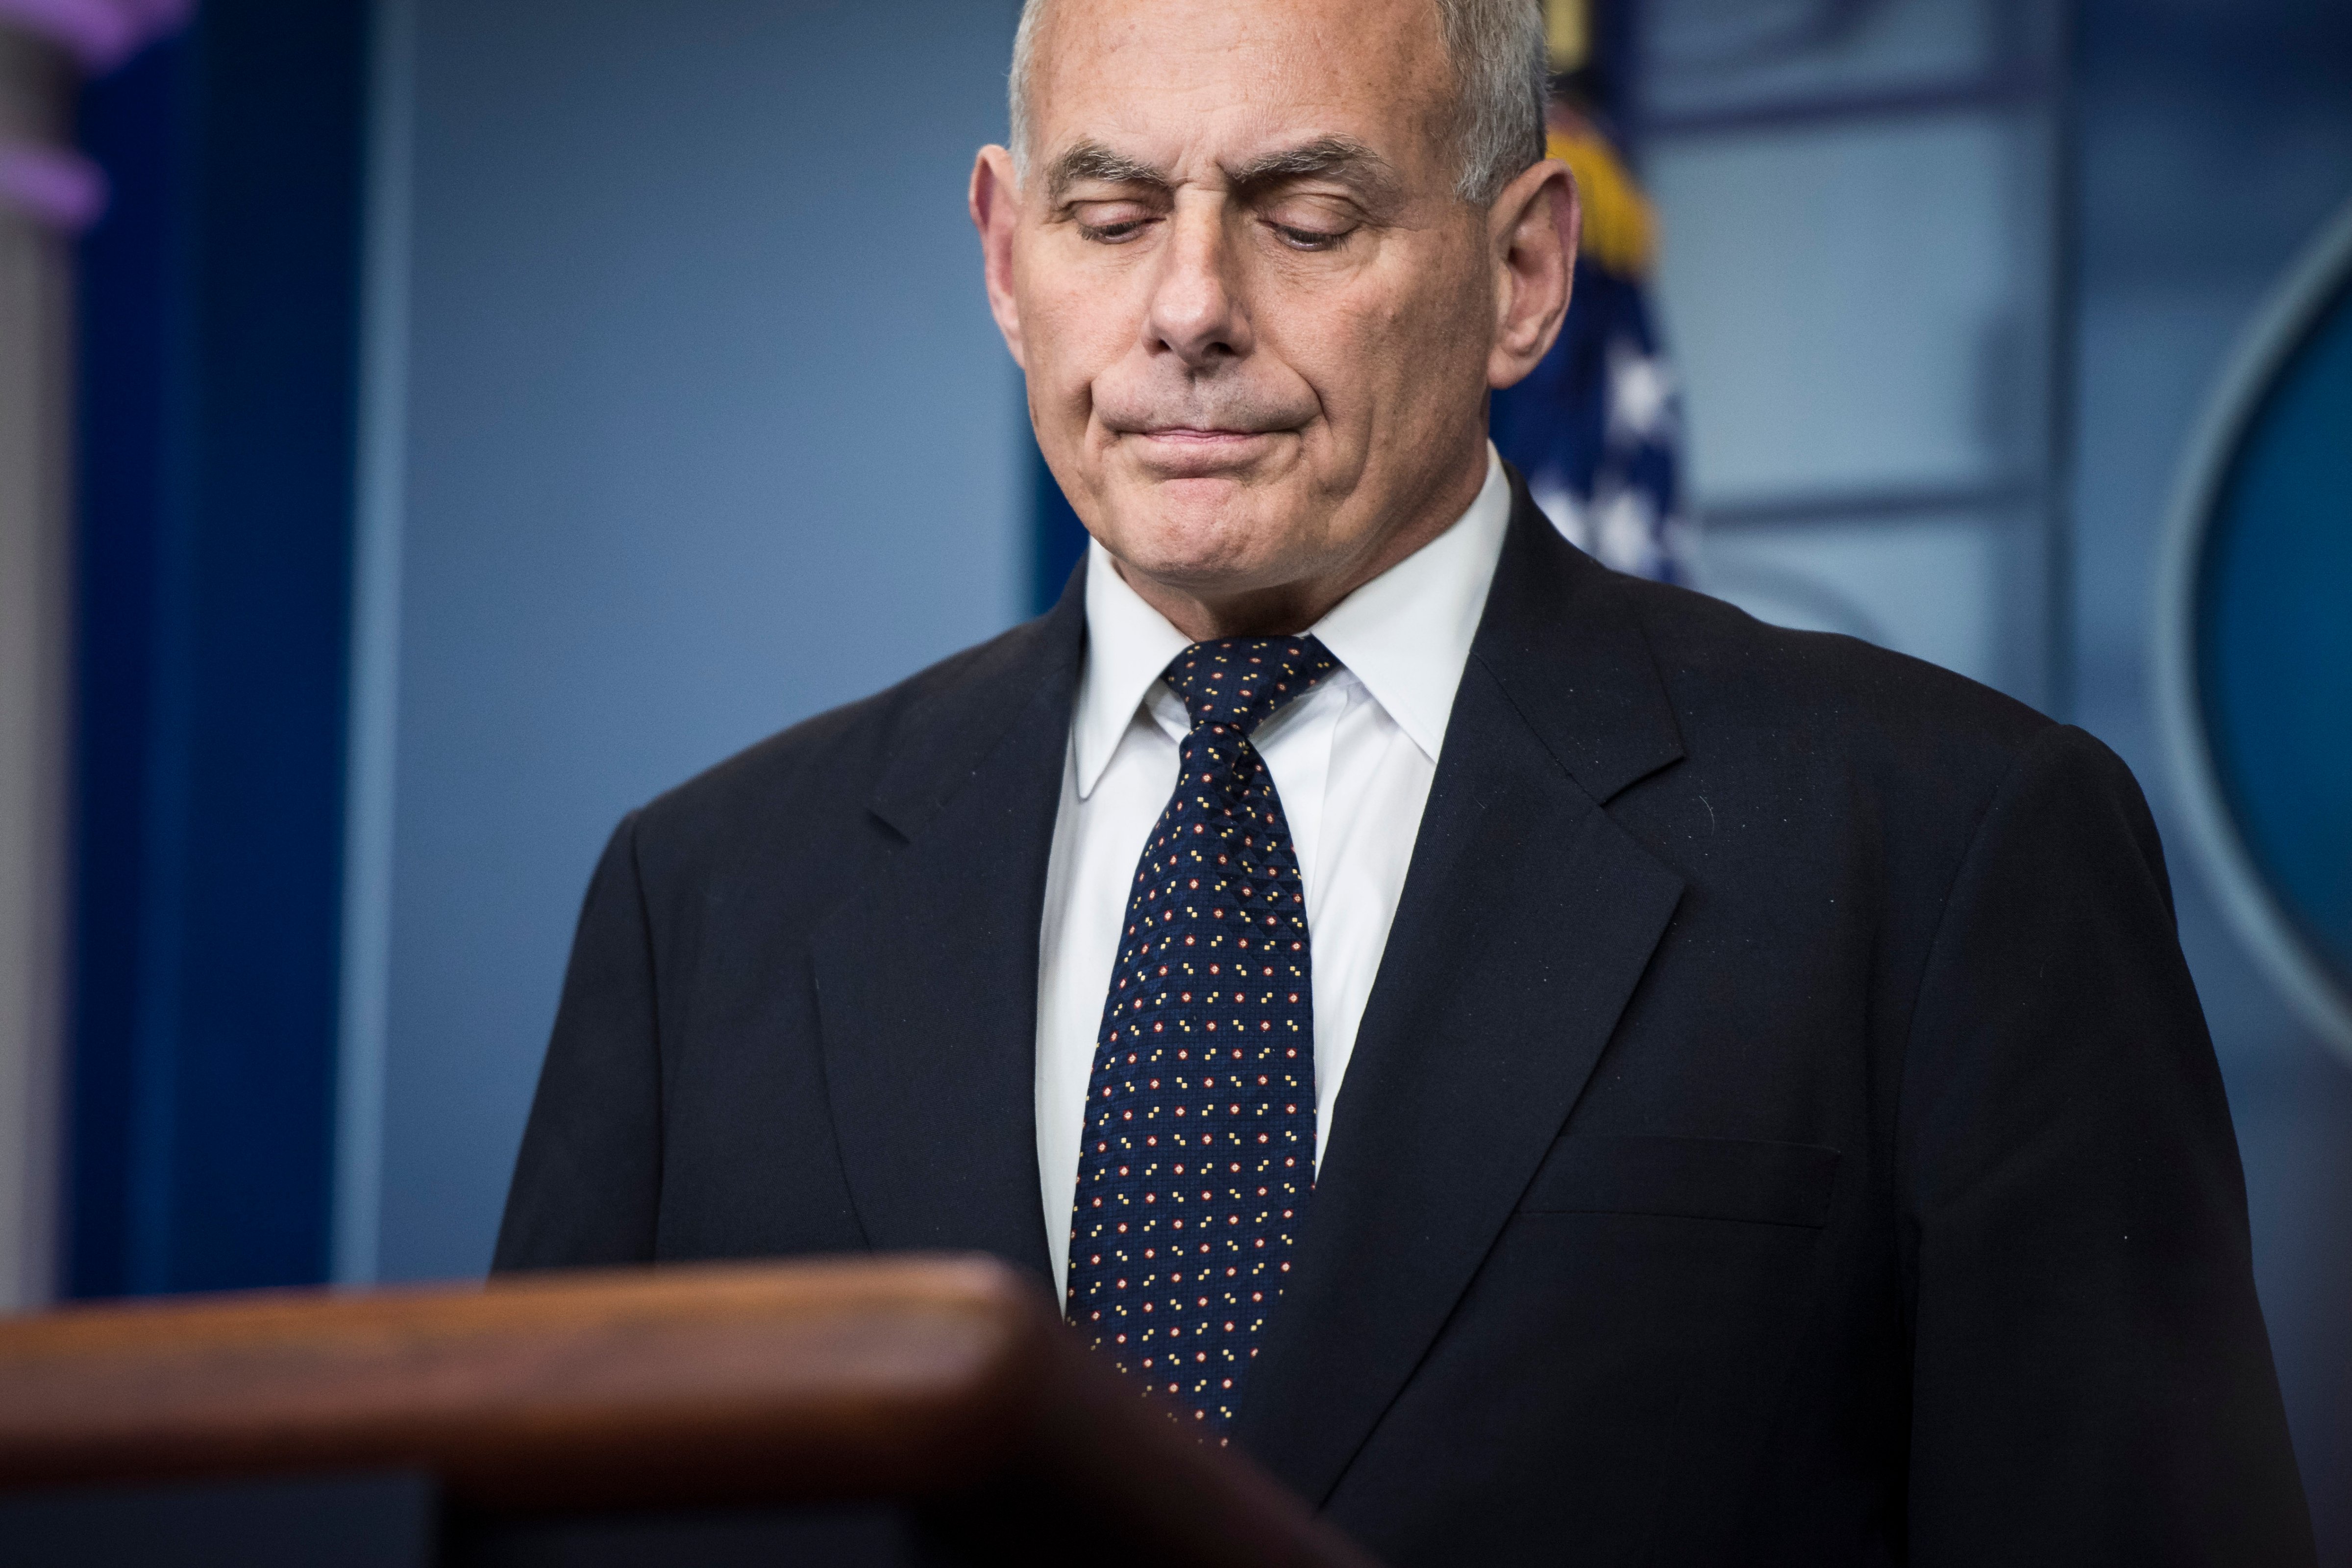 White House Chief of Staff John F. Kelly takes questions and talks about his son during the daily press briefing at the White House on Oct. 19, 2017. (Getty Images)